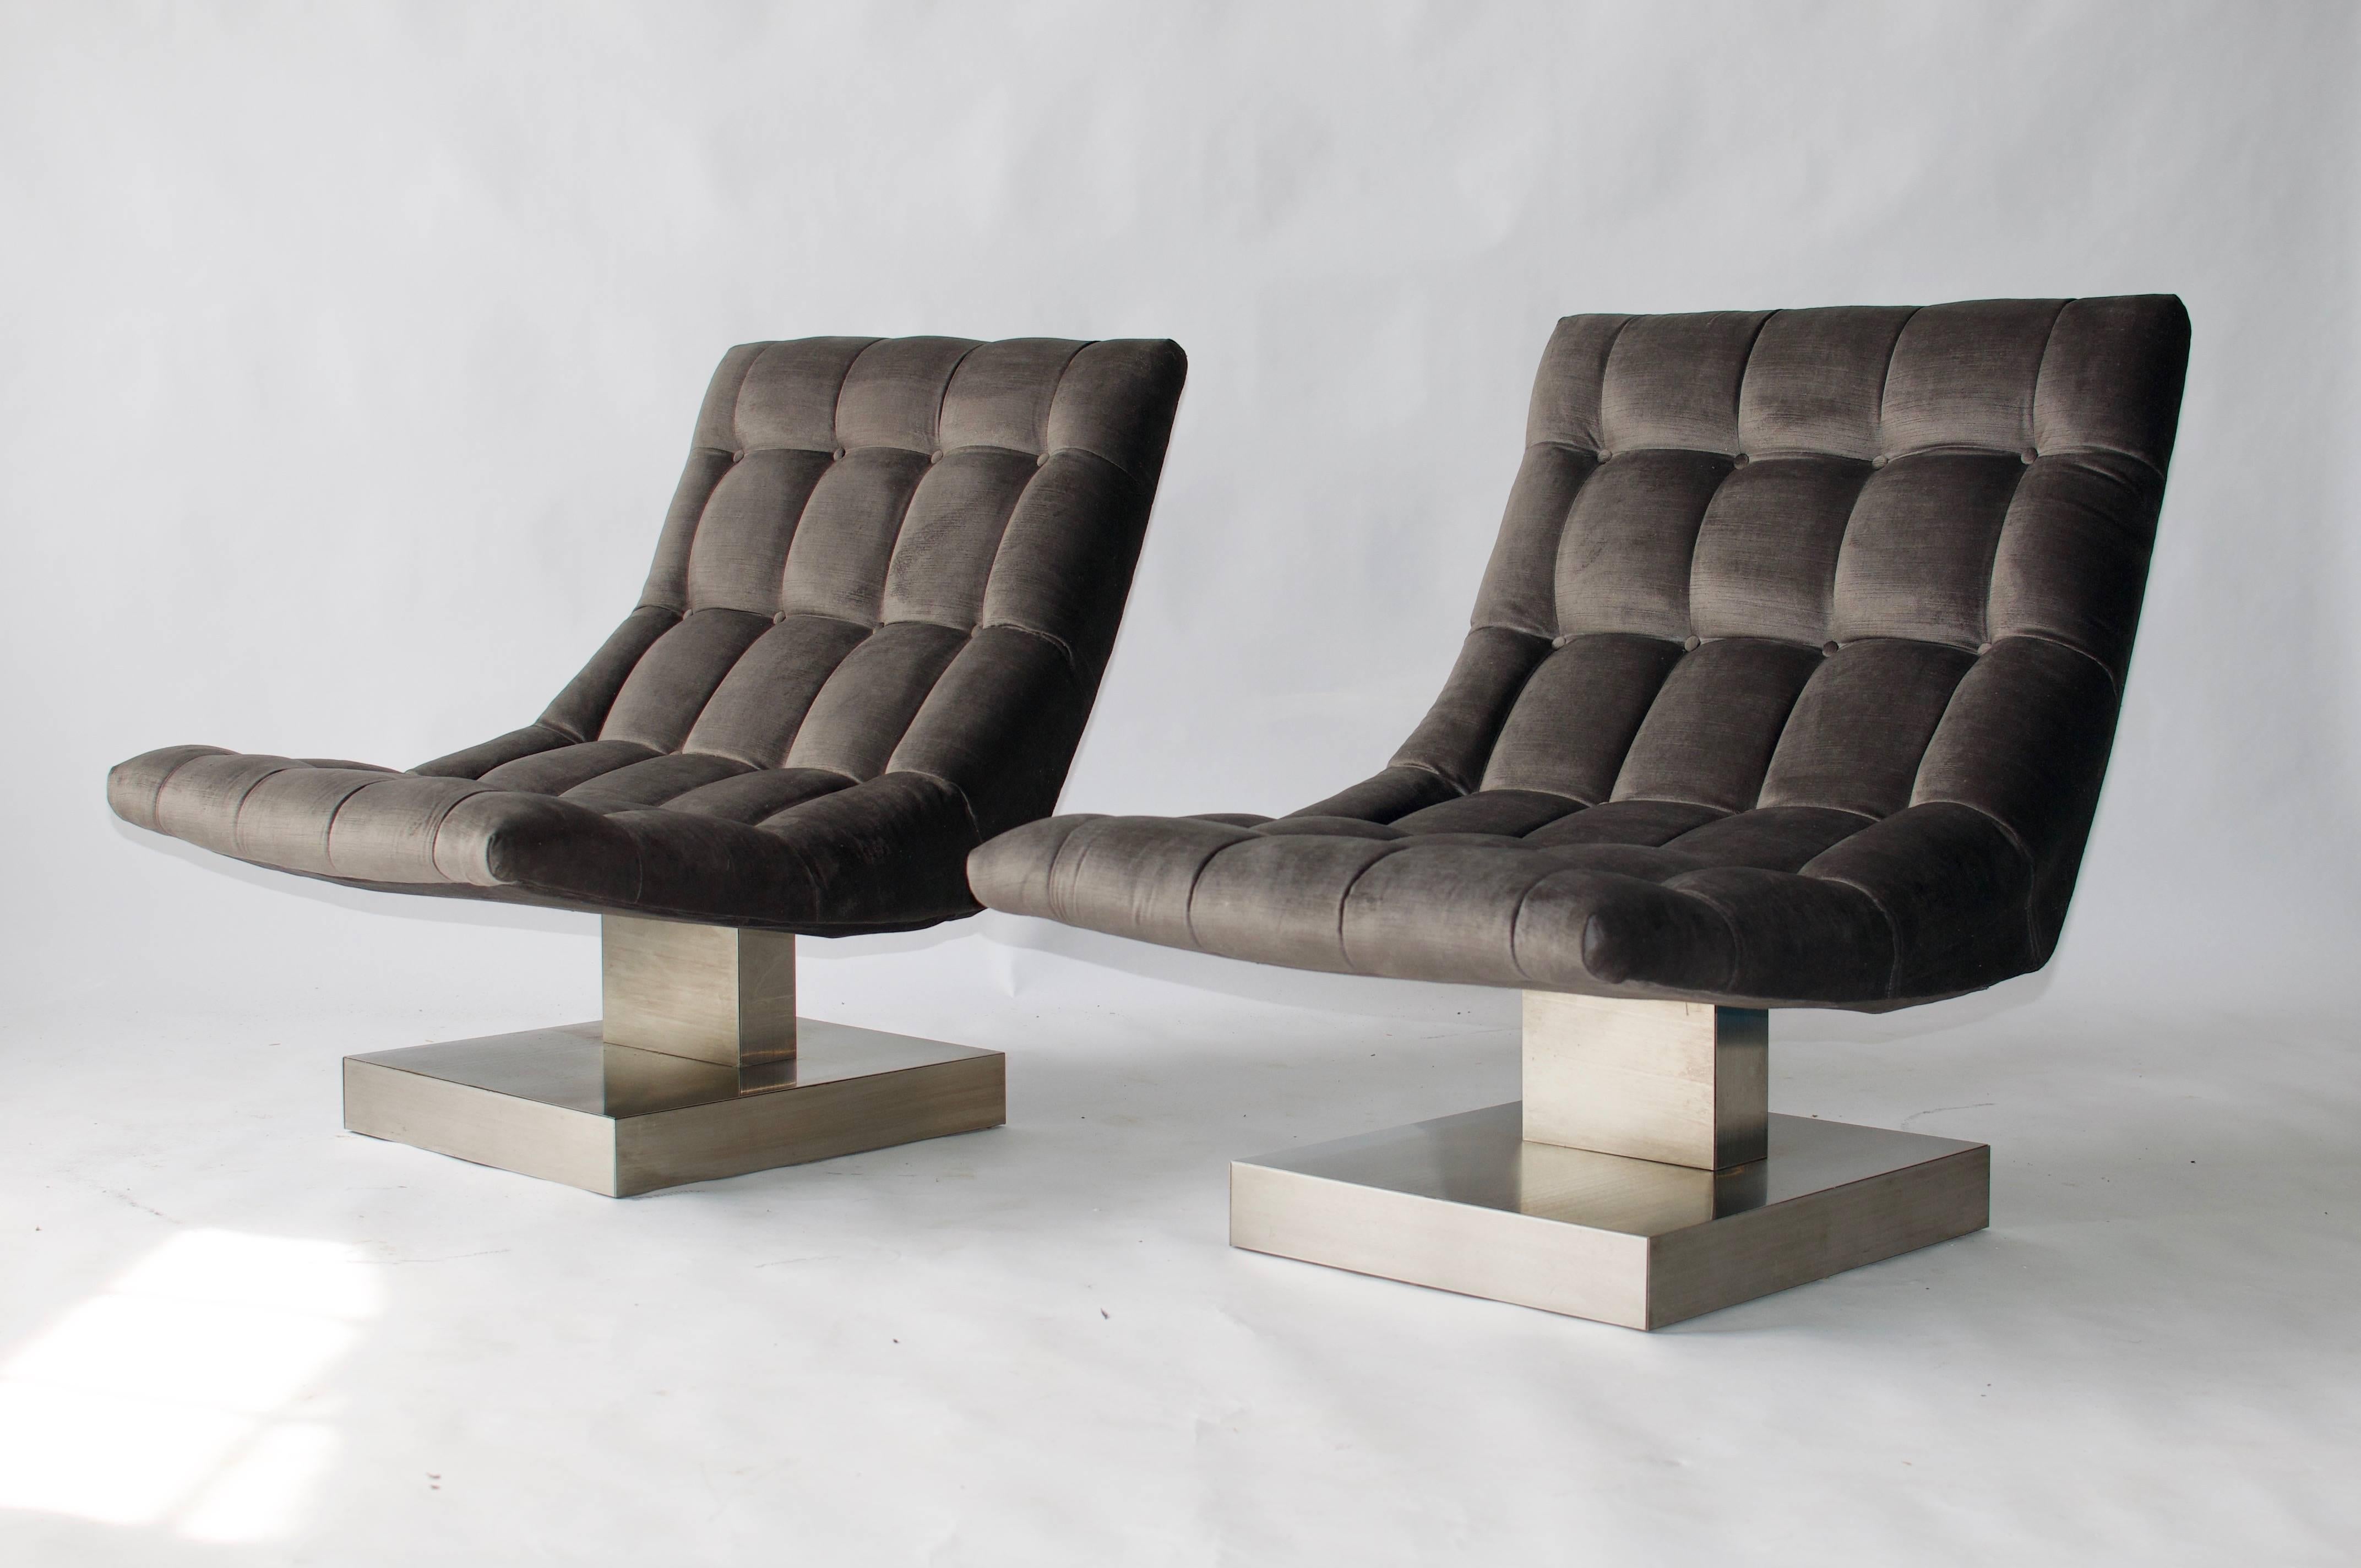 Pair of Milo Baughman cantilevered lounge chairs on chrome pedestal bases.